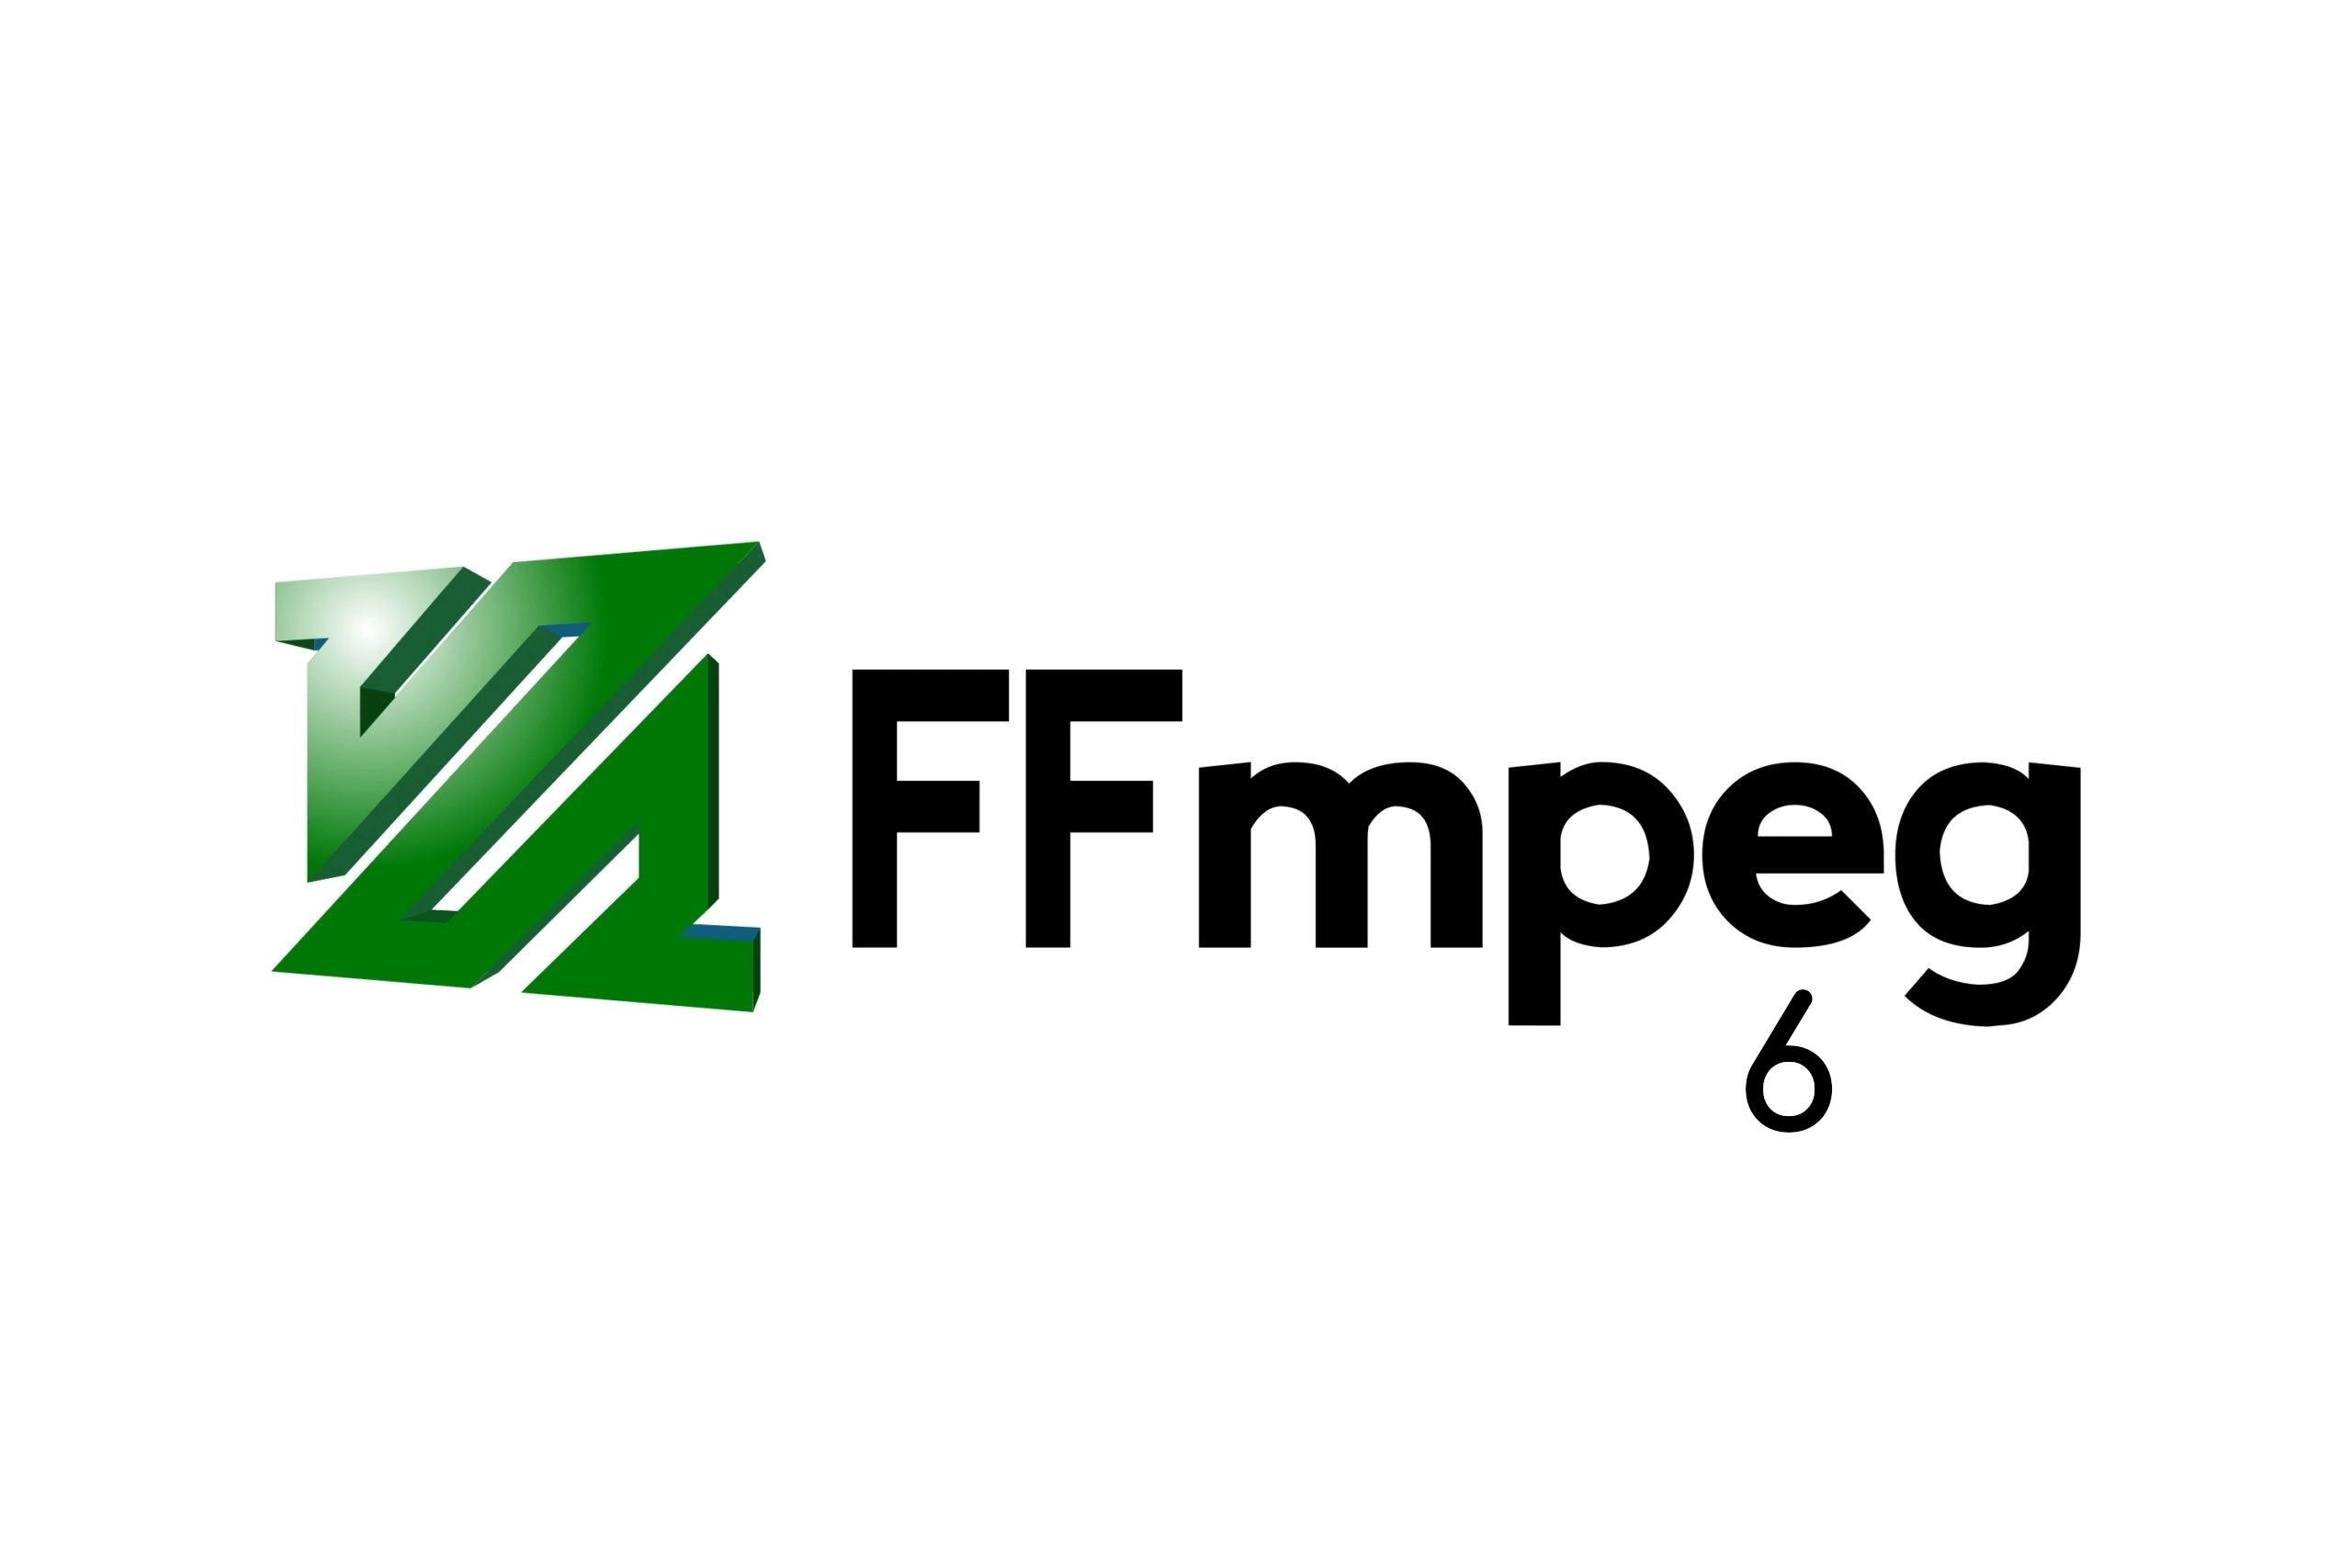 FFmpeg 6.0 “Von Neumann” Released with Radiance HDR Image Support, New Decoders